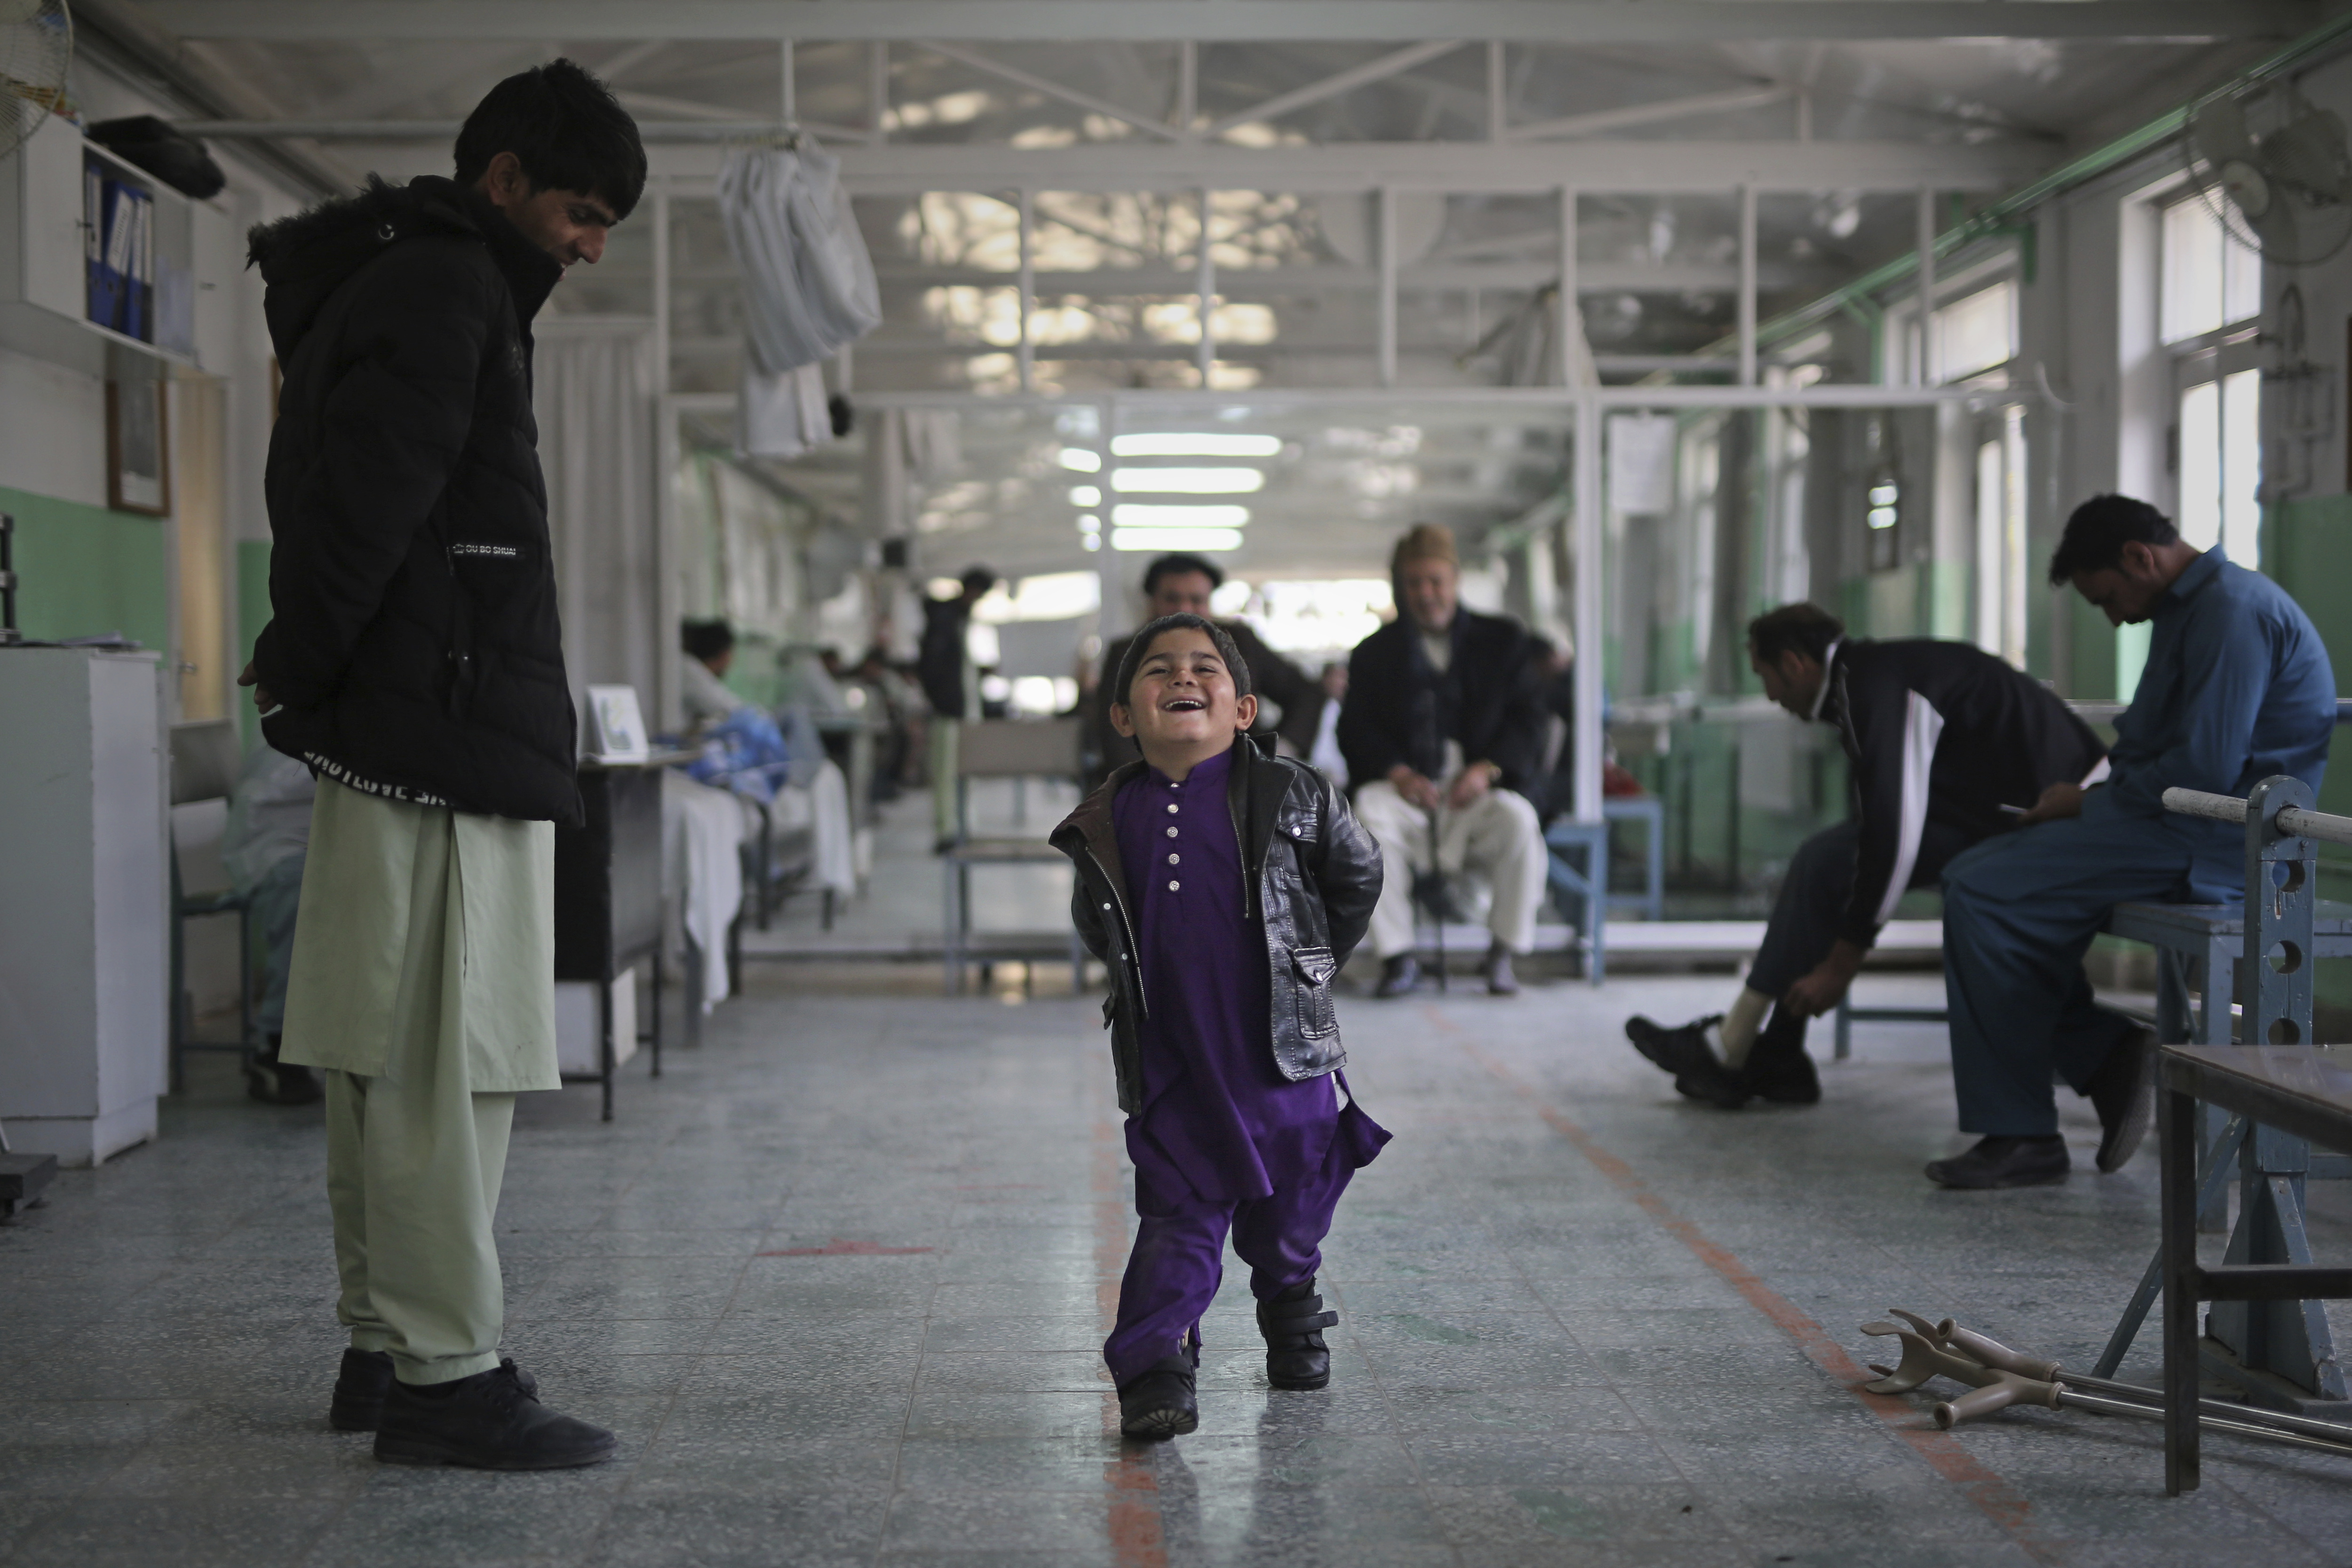 Six year-old Inamullah, who is suffering from clubfoot, grins as he walks without any assistance for the first time in his life at the International Committee of the Red Cross (ICRC) physical rehabilitation center in Kabul, Afghanistan, Sunday, Dec. 1, 2019. Since the ICRC began its rehabilitation program in Afghanistan in 1988, over 177,000 people, including over 46,000 amputees, have been treated at its centers across the country. Among the amputees registered, 77% were landmine victims and 70% civilians. (AP Photo/Altaf Qadri)